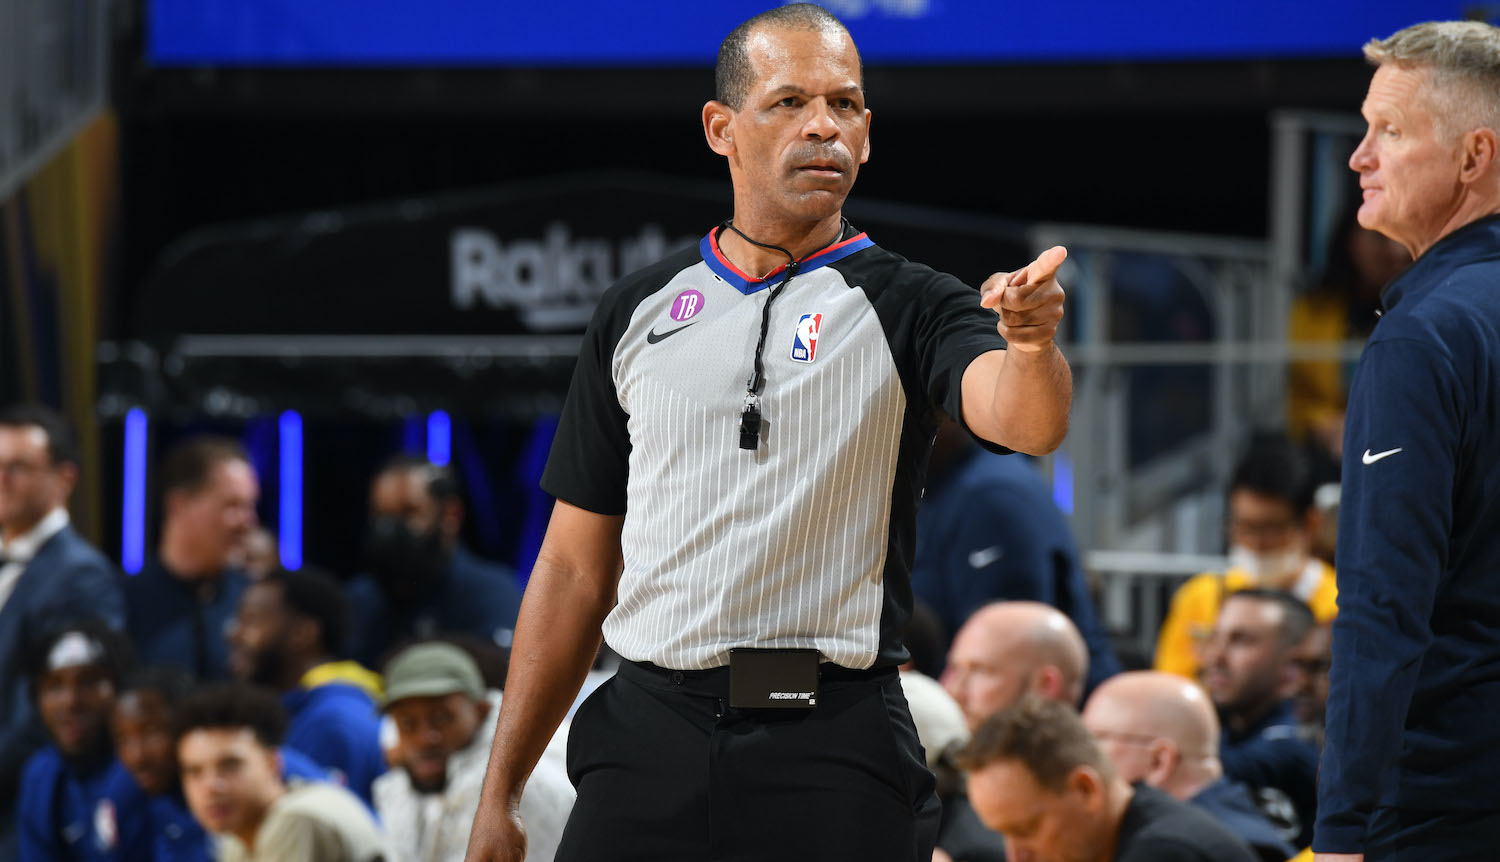 Referee Eric Lewis #42 looks on during the game between the Los Angeles Lakers and the Golden State Warriors during the Western Conference Semi Finals of the 2023 NBA Playoffs on May 4, 2023 at Chase Center in San Francisco, California. NOTE TO USER: User expressly acknowledges and agrees that, by downloading and/or using this Photograph, user is consenting to the terms and conditions of the Getty Images License Agreement. Mandatory Copyright Notice: Copyright 2023 NBAE (Photo by Andrew D. Bernstein/NBAE via Getty Images)